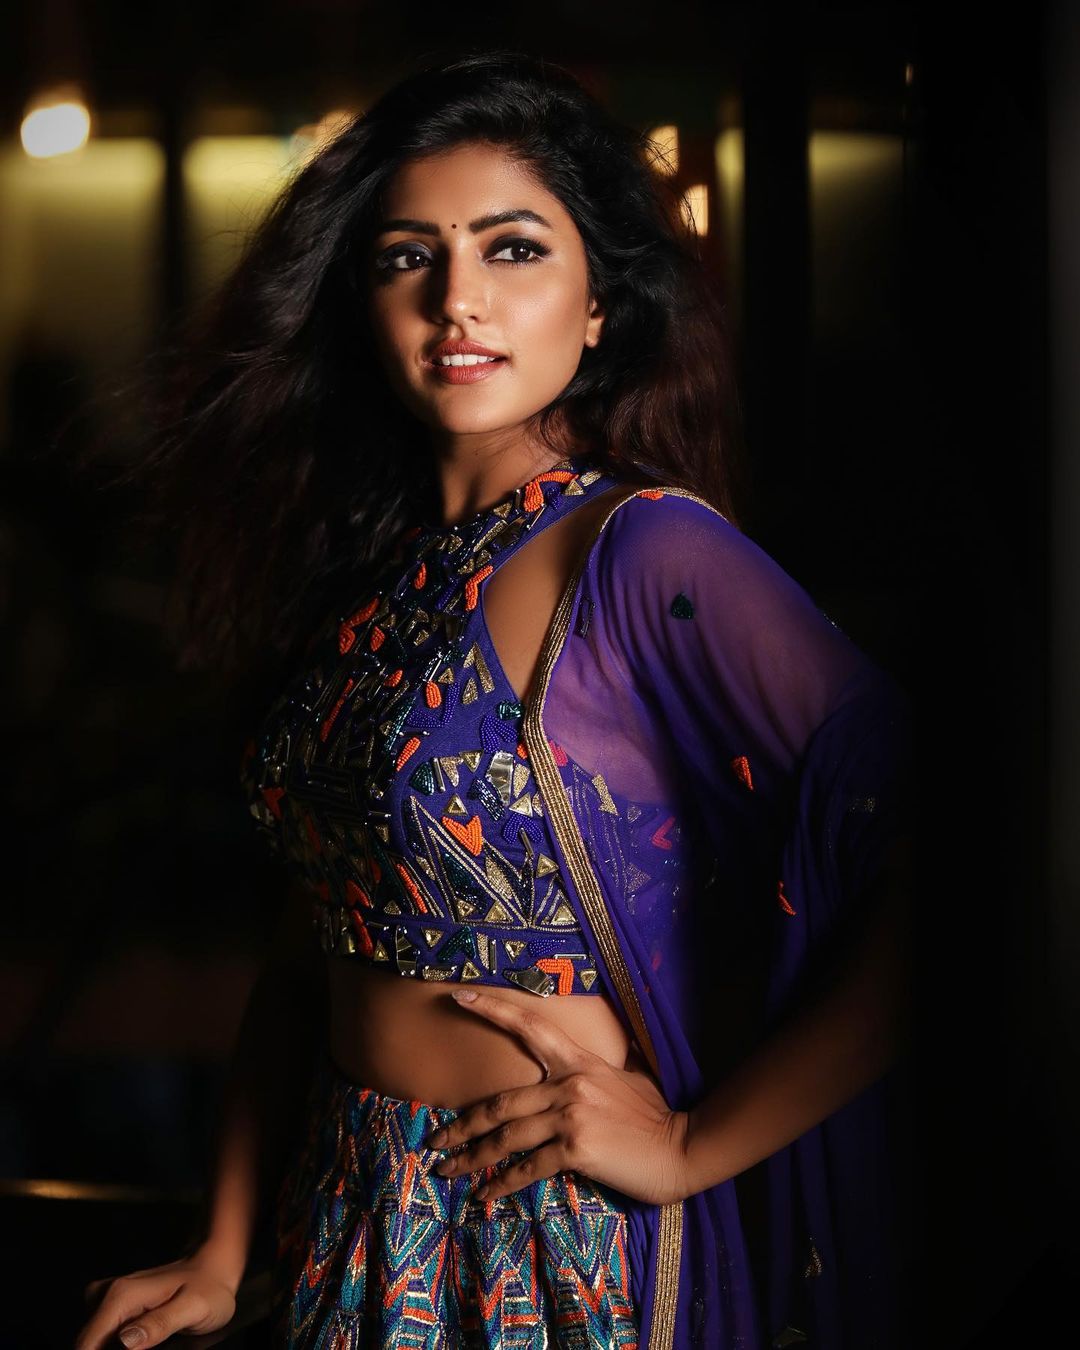 Esha Rebba Ned Sex - Exposing hot photos gallery | Eesha Rebba latest hot and sexy photoshoot  Photos: HD Images, Pictures, Stills, First Look Posters of Exposing hot  photos gallery | Eesha Rebba latest hot and sexy